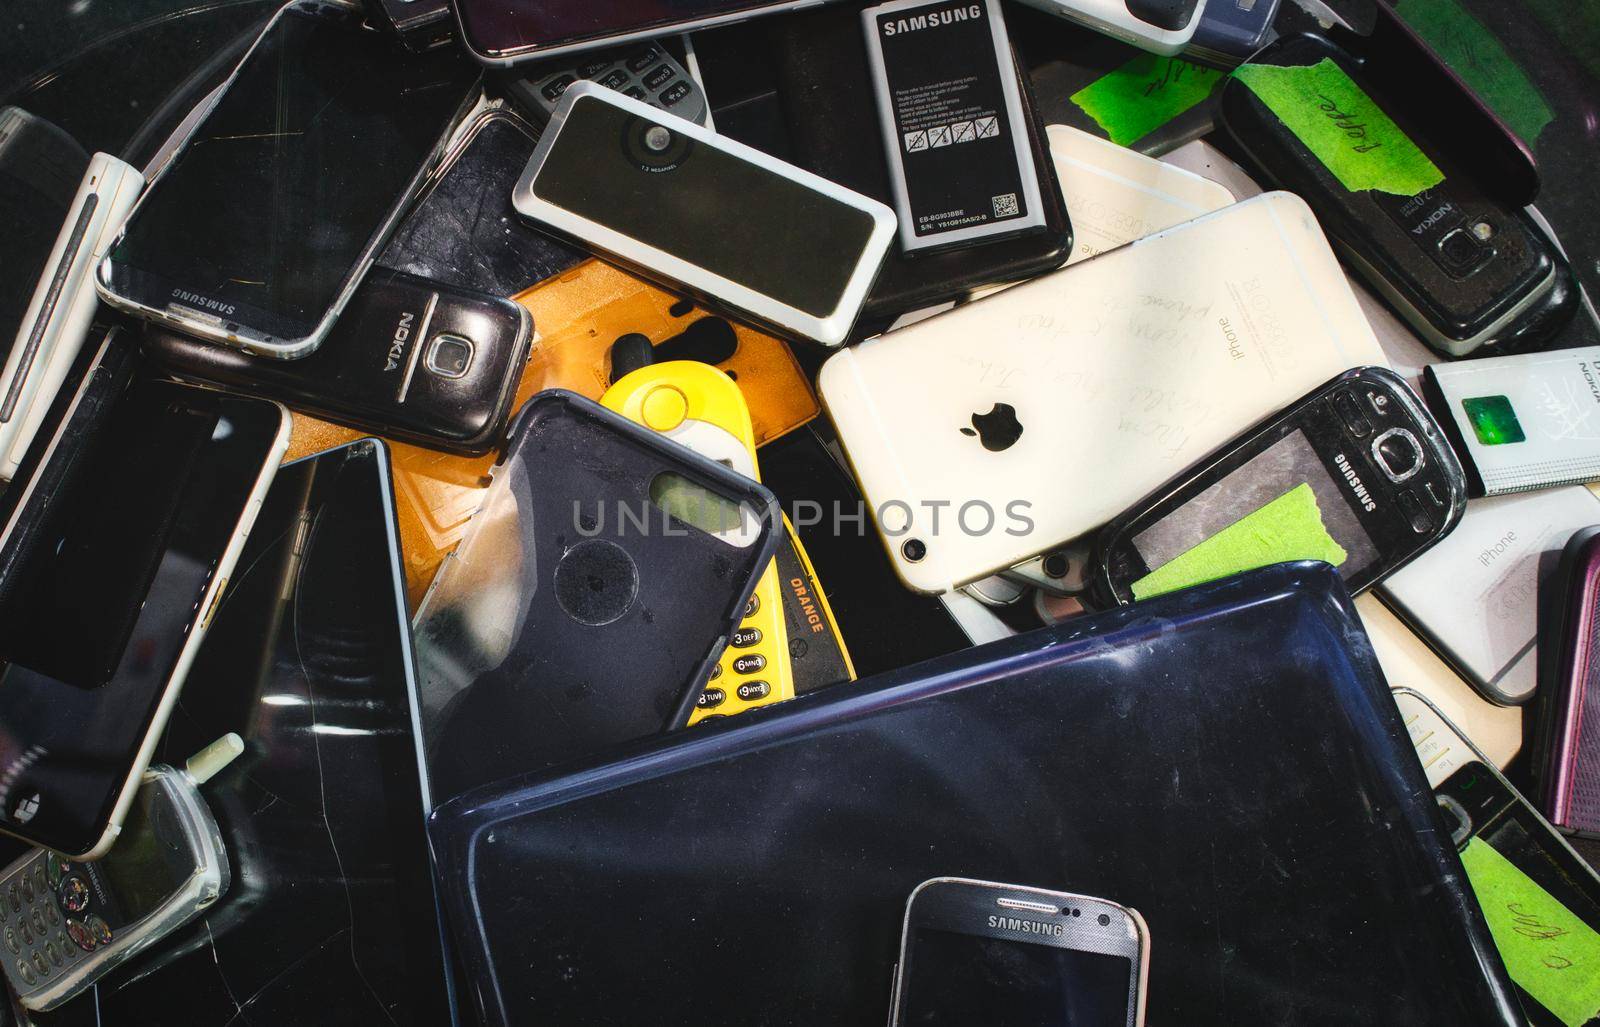 Mosta / Malta - May 11, 2019: Broken mobile digital devices in a bin to be recycled by tennesseewitney